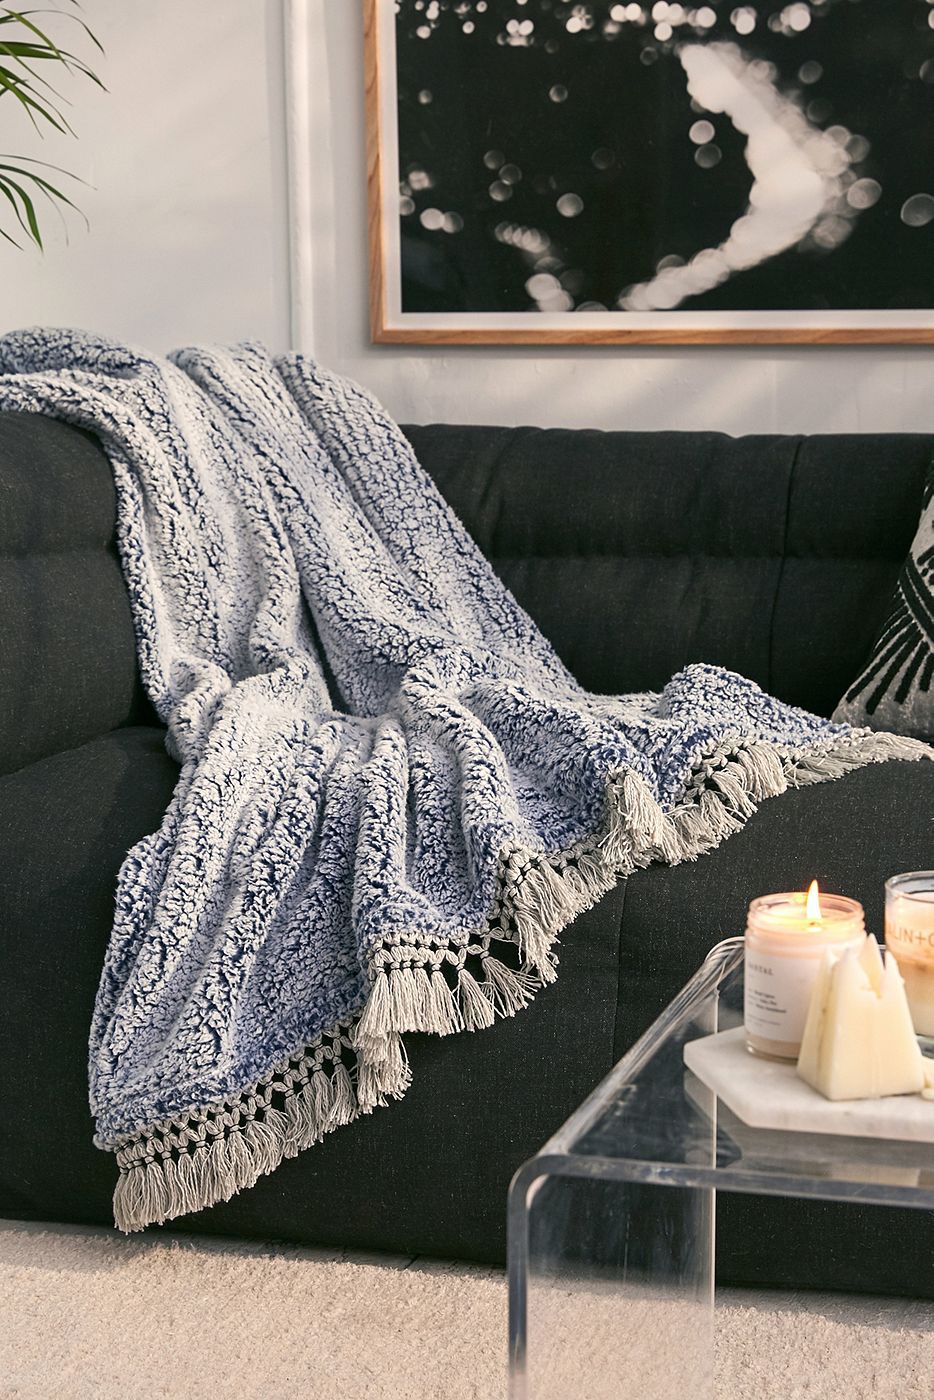 10 Best Throw Blankets - The Coziest Throw Blankets You Can Buy